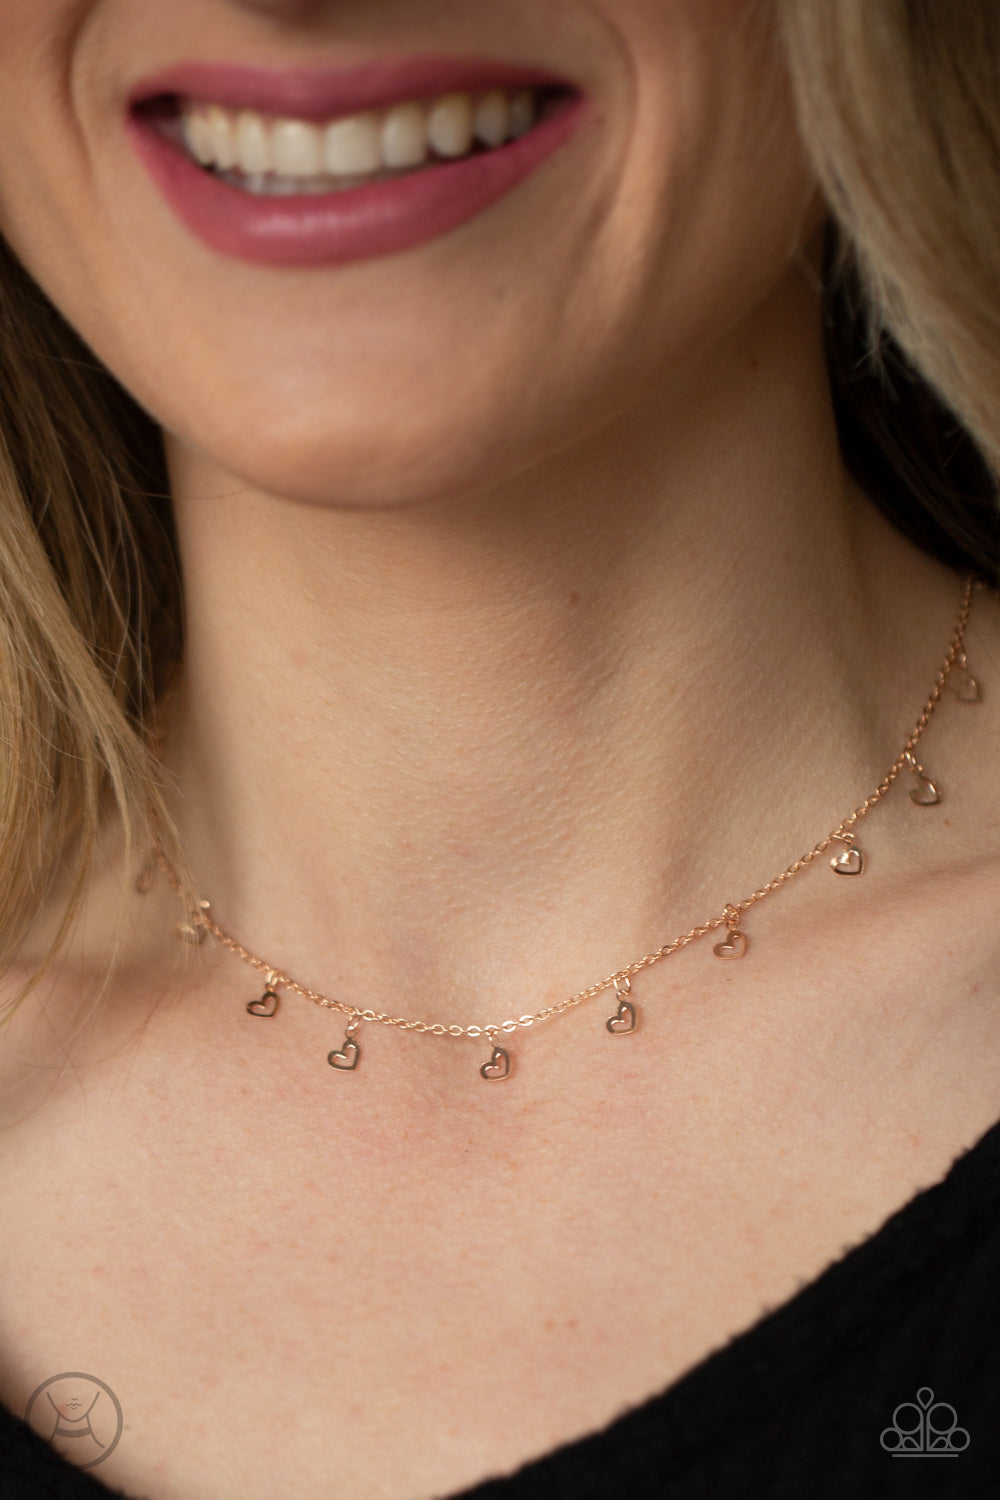 Charismatically Cupid Necklaces - Rose Gold